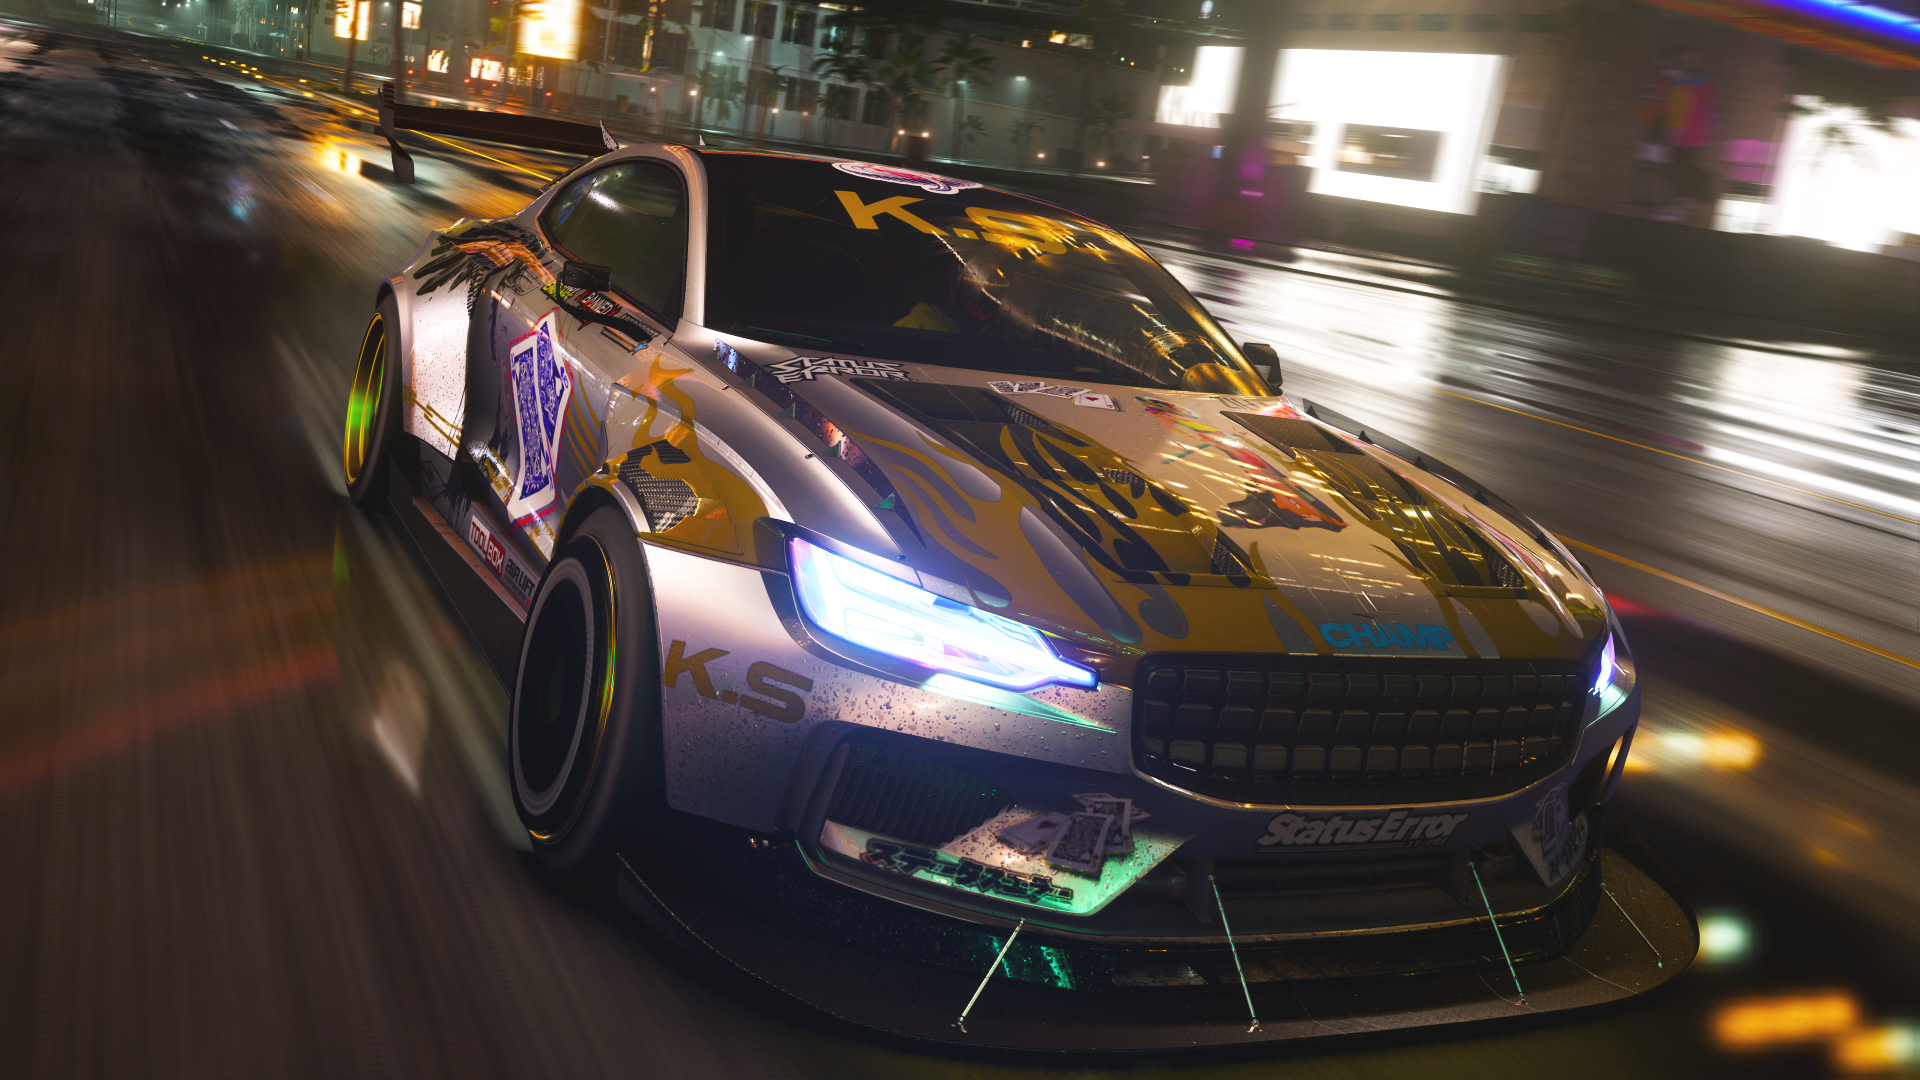 Need For Speed Heat Need For Speed EA Games Car Video Game Car Race Cars 4K Gaming 4k Pic Neon Custo 1920x1080